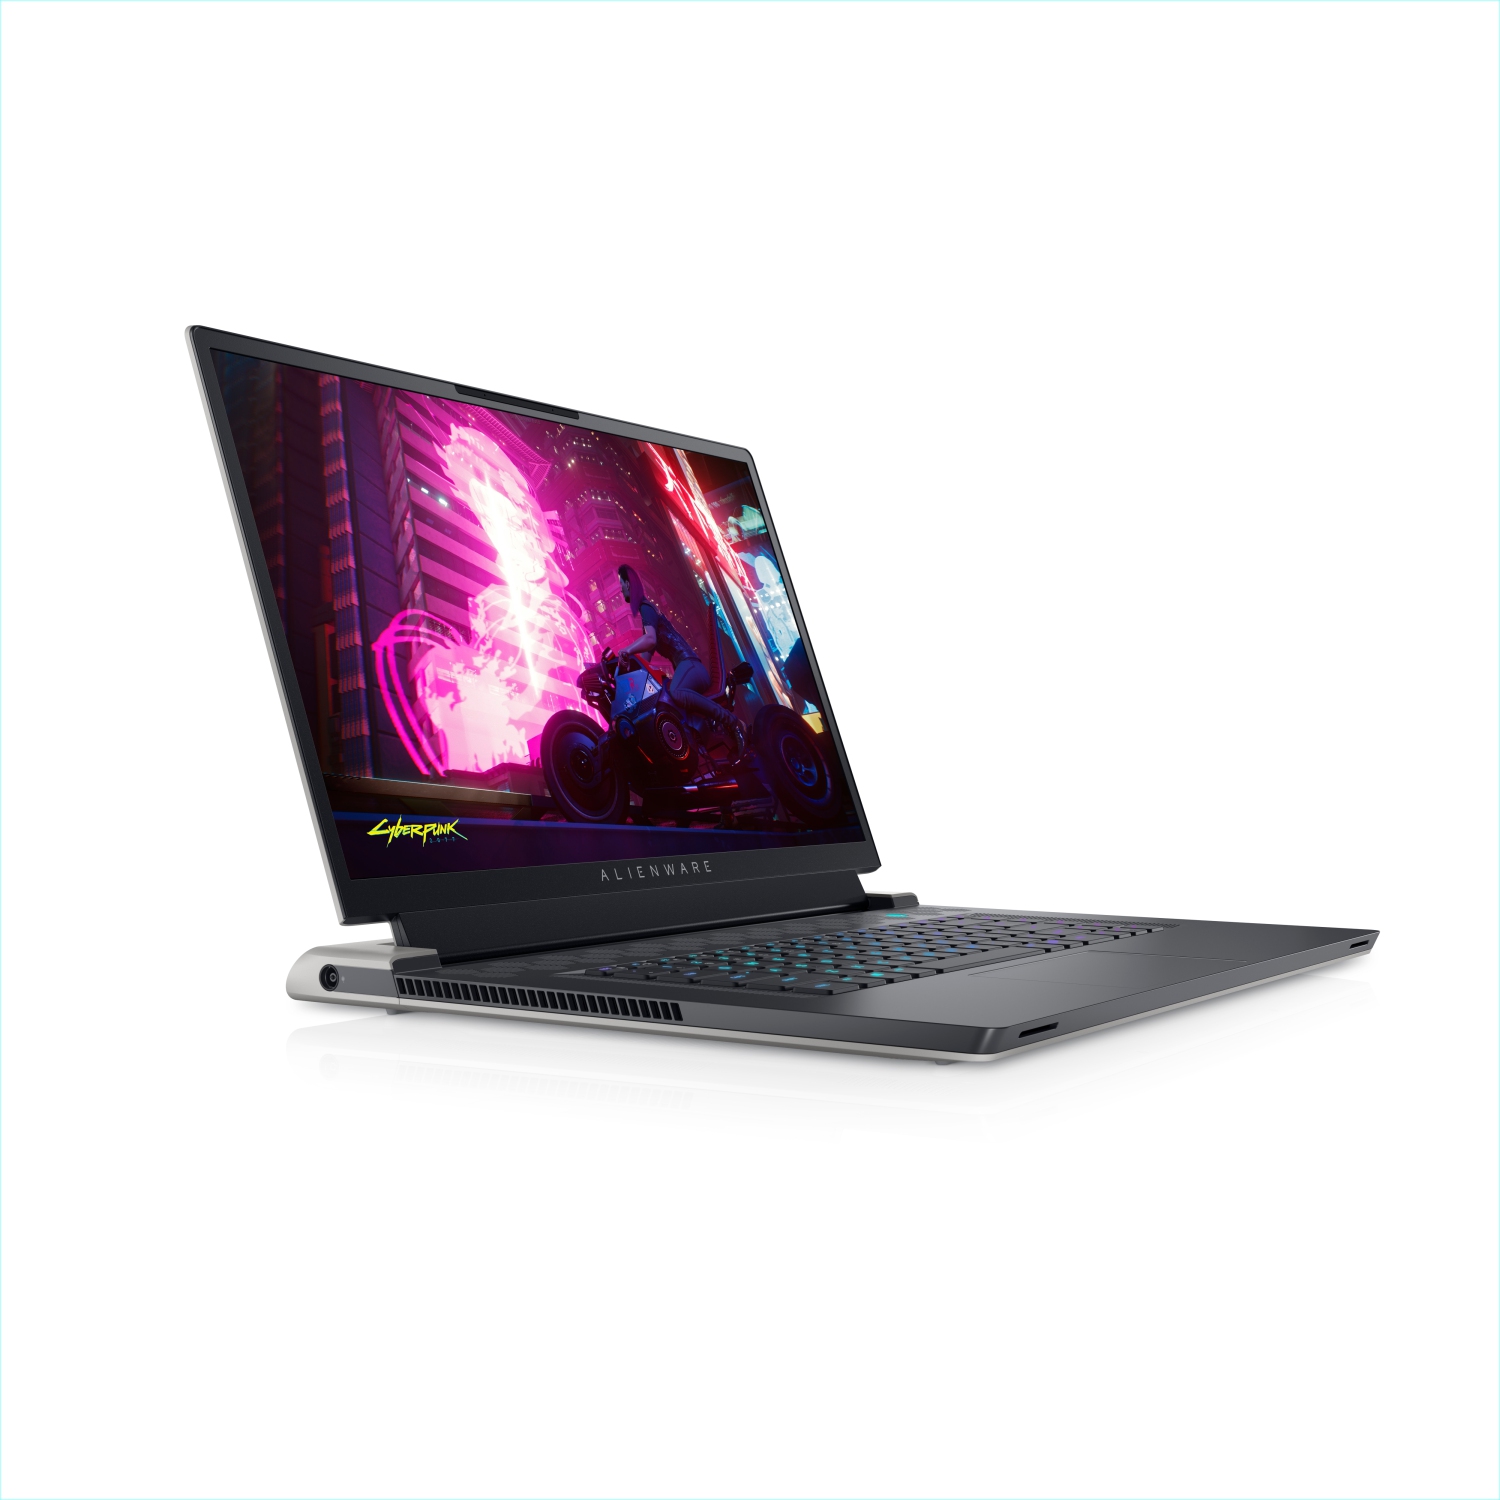 Refurbished (Excellent) - Dell Alienware X17 R1 Gaming Laptop (2021), 17.3" 4K, Core i9, 1TB SSD + 512GB SSD, 32GB RAM, RTX 3080, 5 GHz, 11th Gen CPU Certified